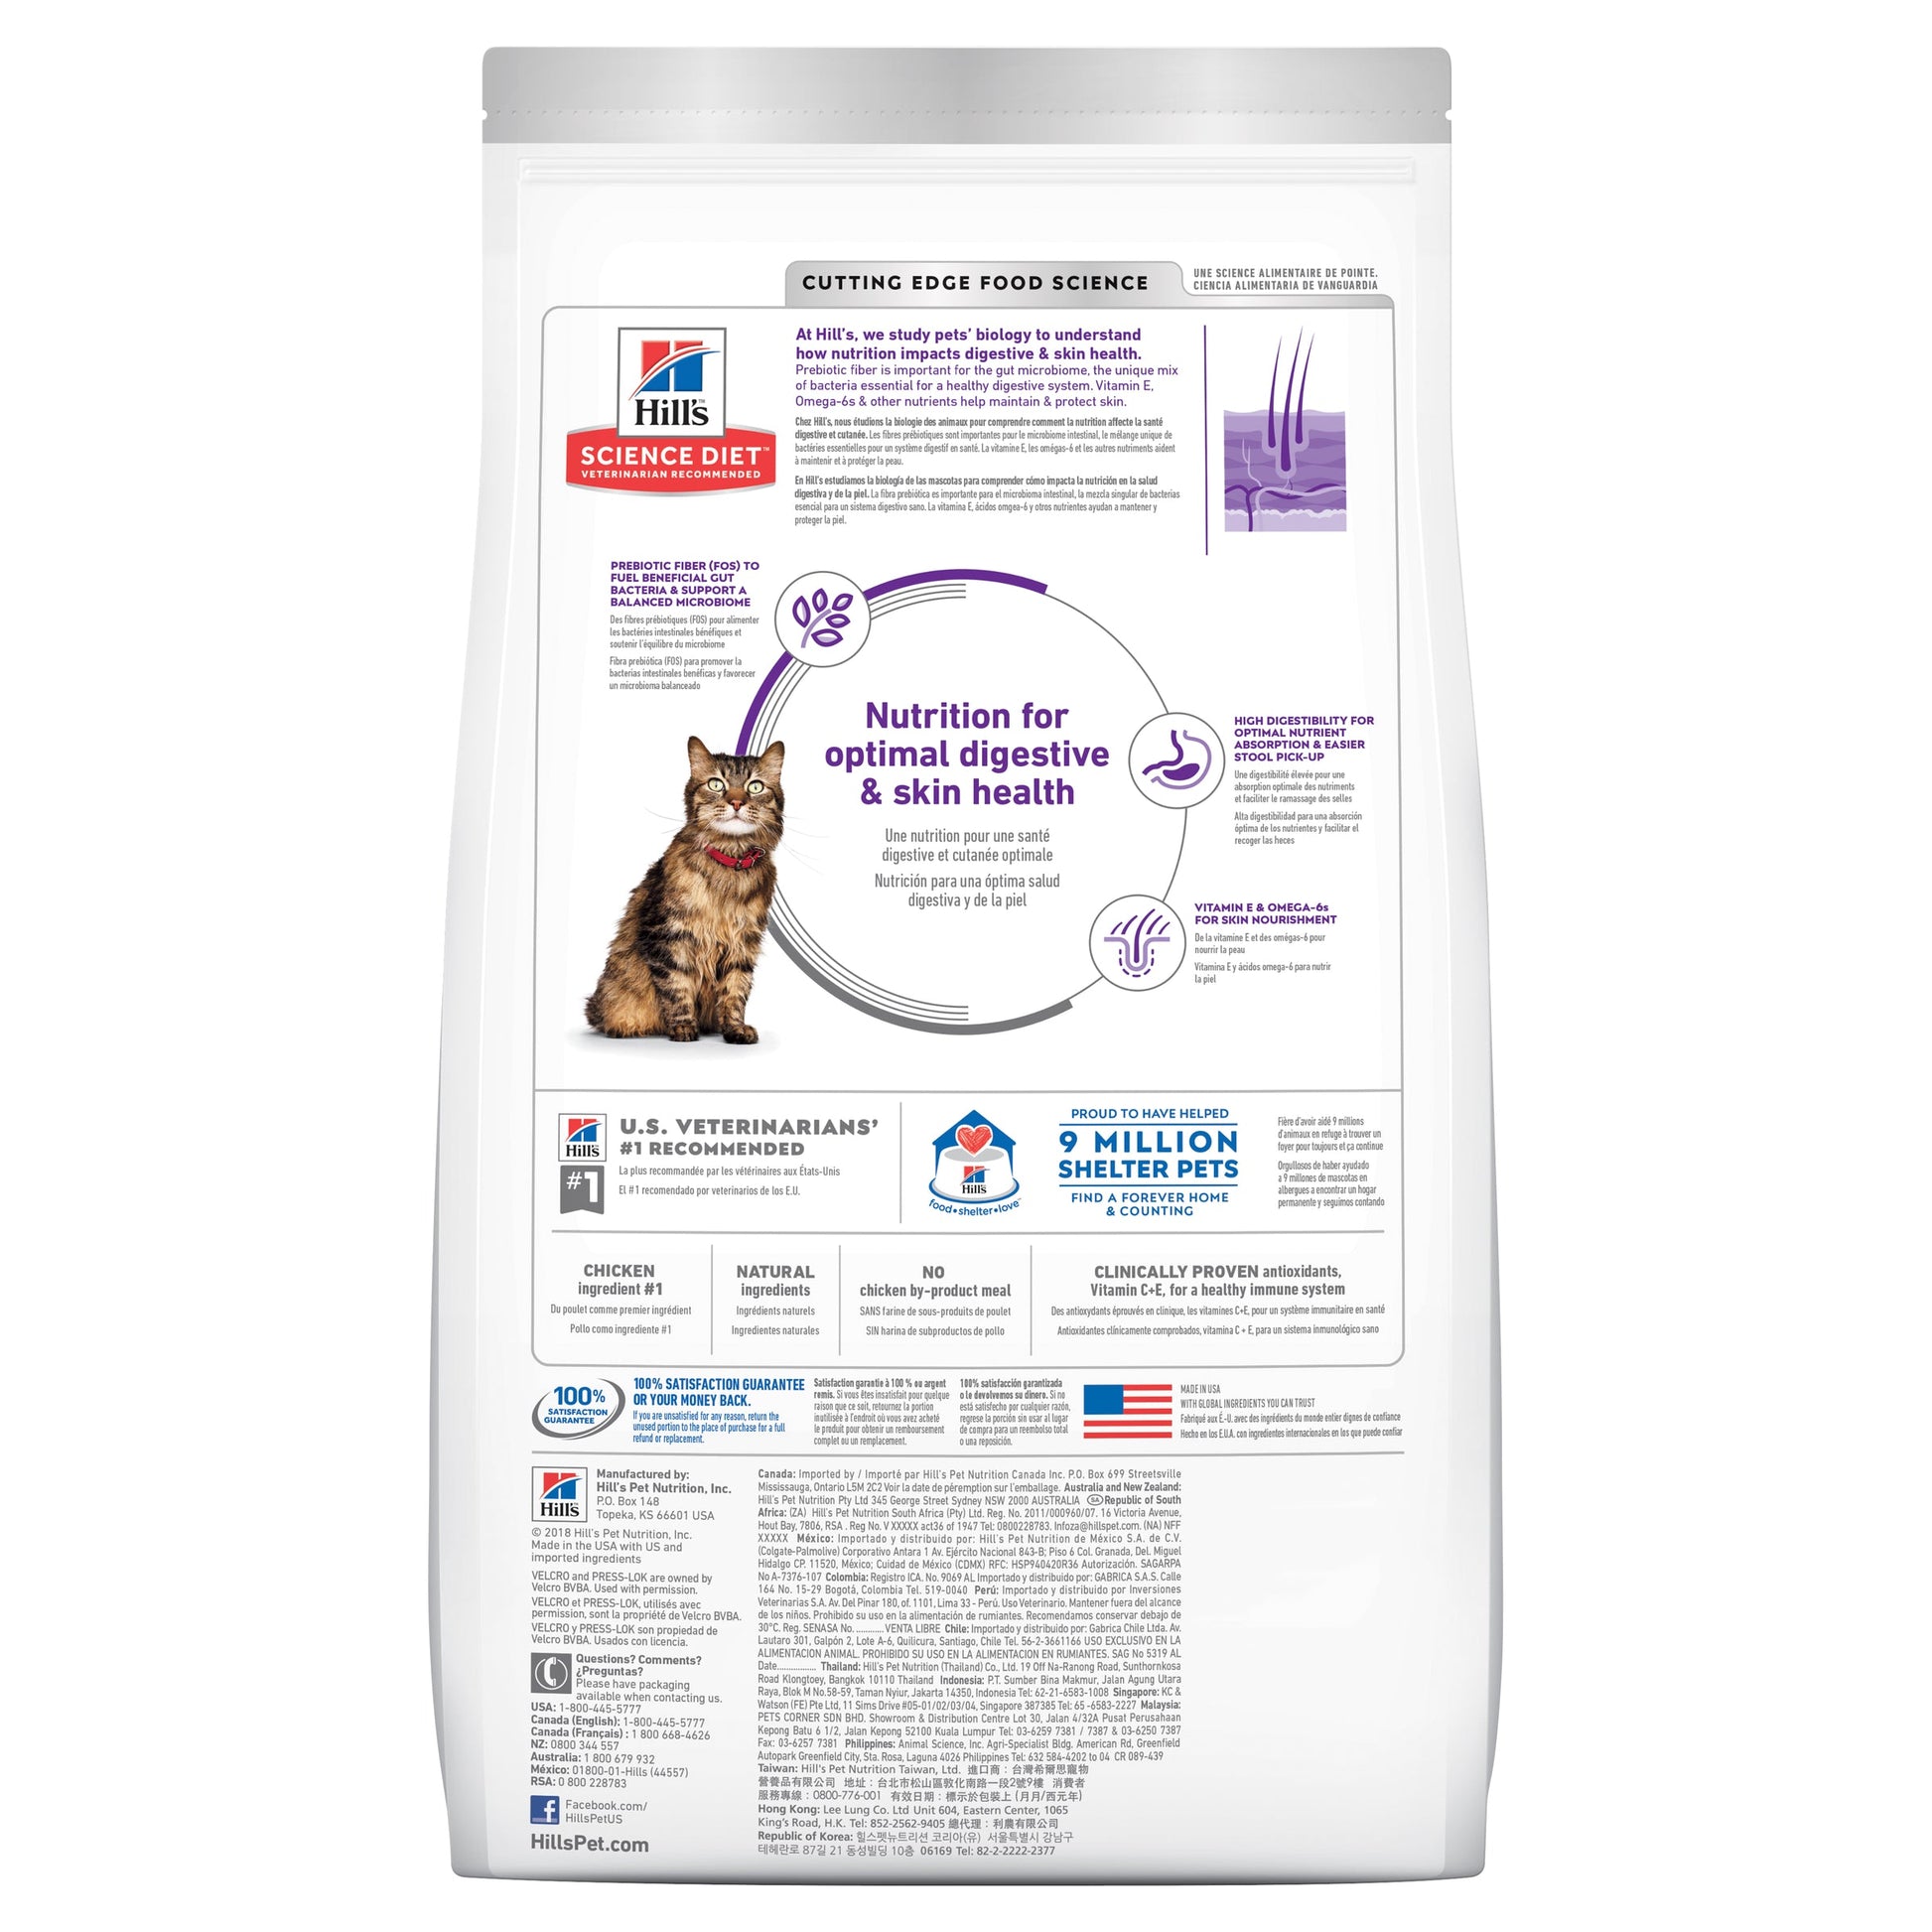 Hills Science Diet Adult Sensitive Stomach And Skin Dry Cat Food 7.03KG - ADS Pet Store